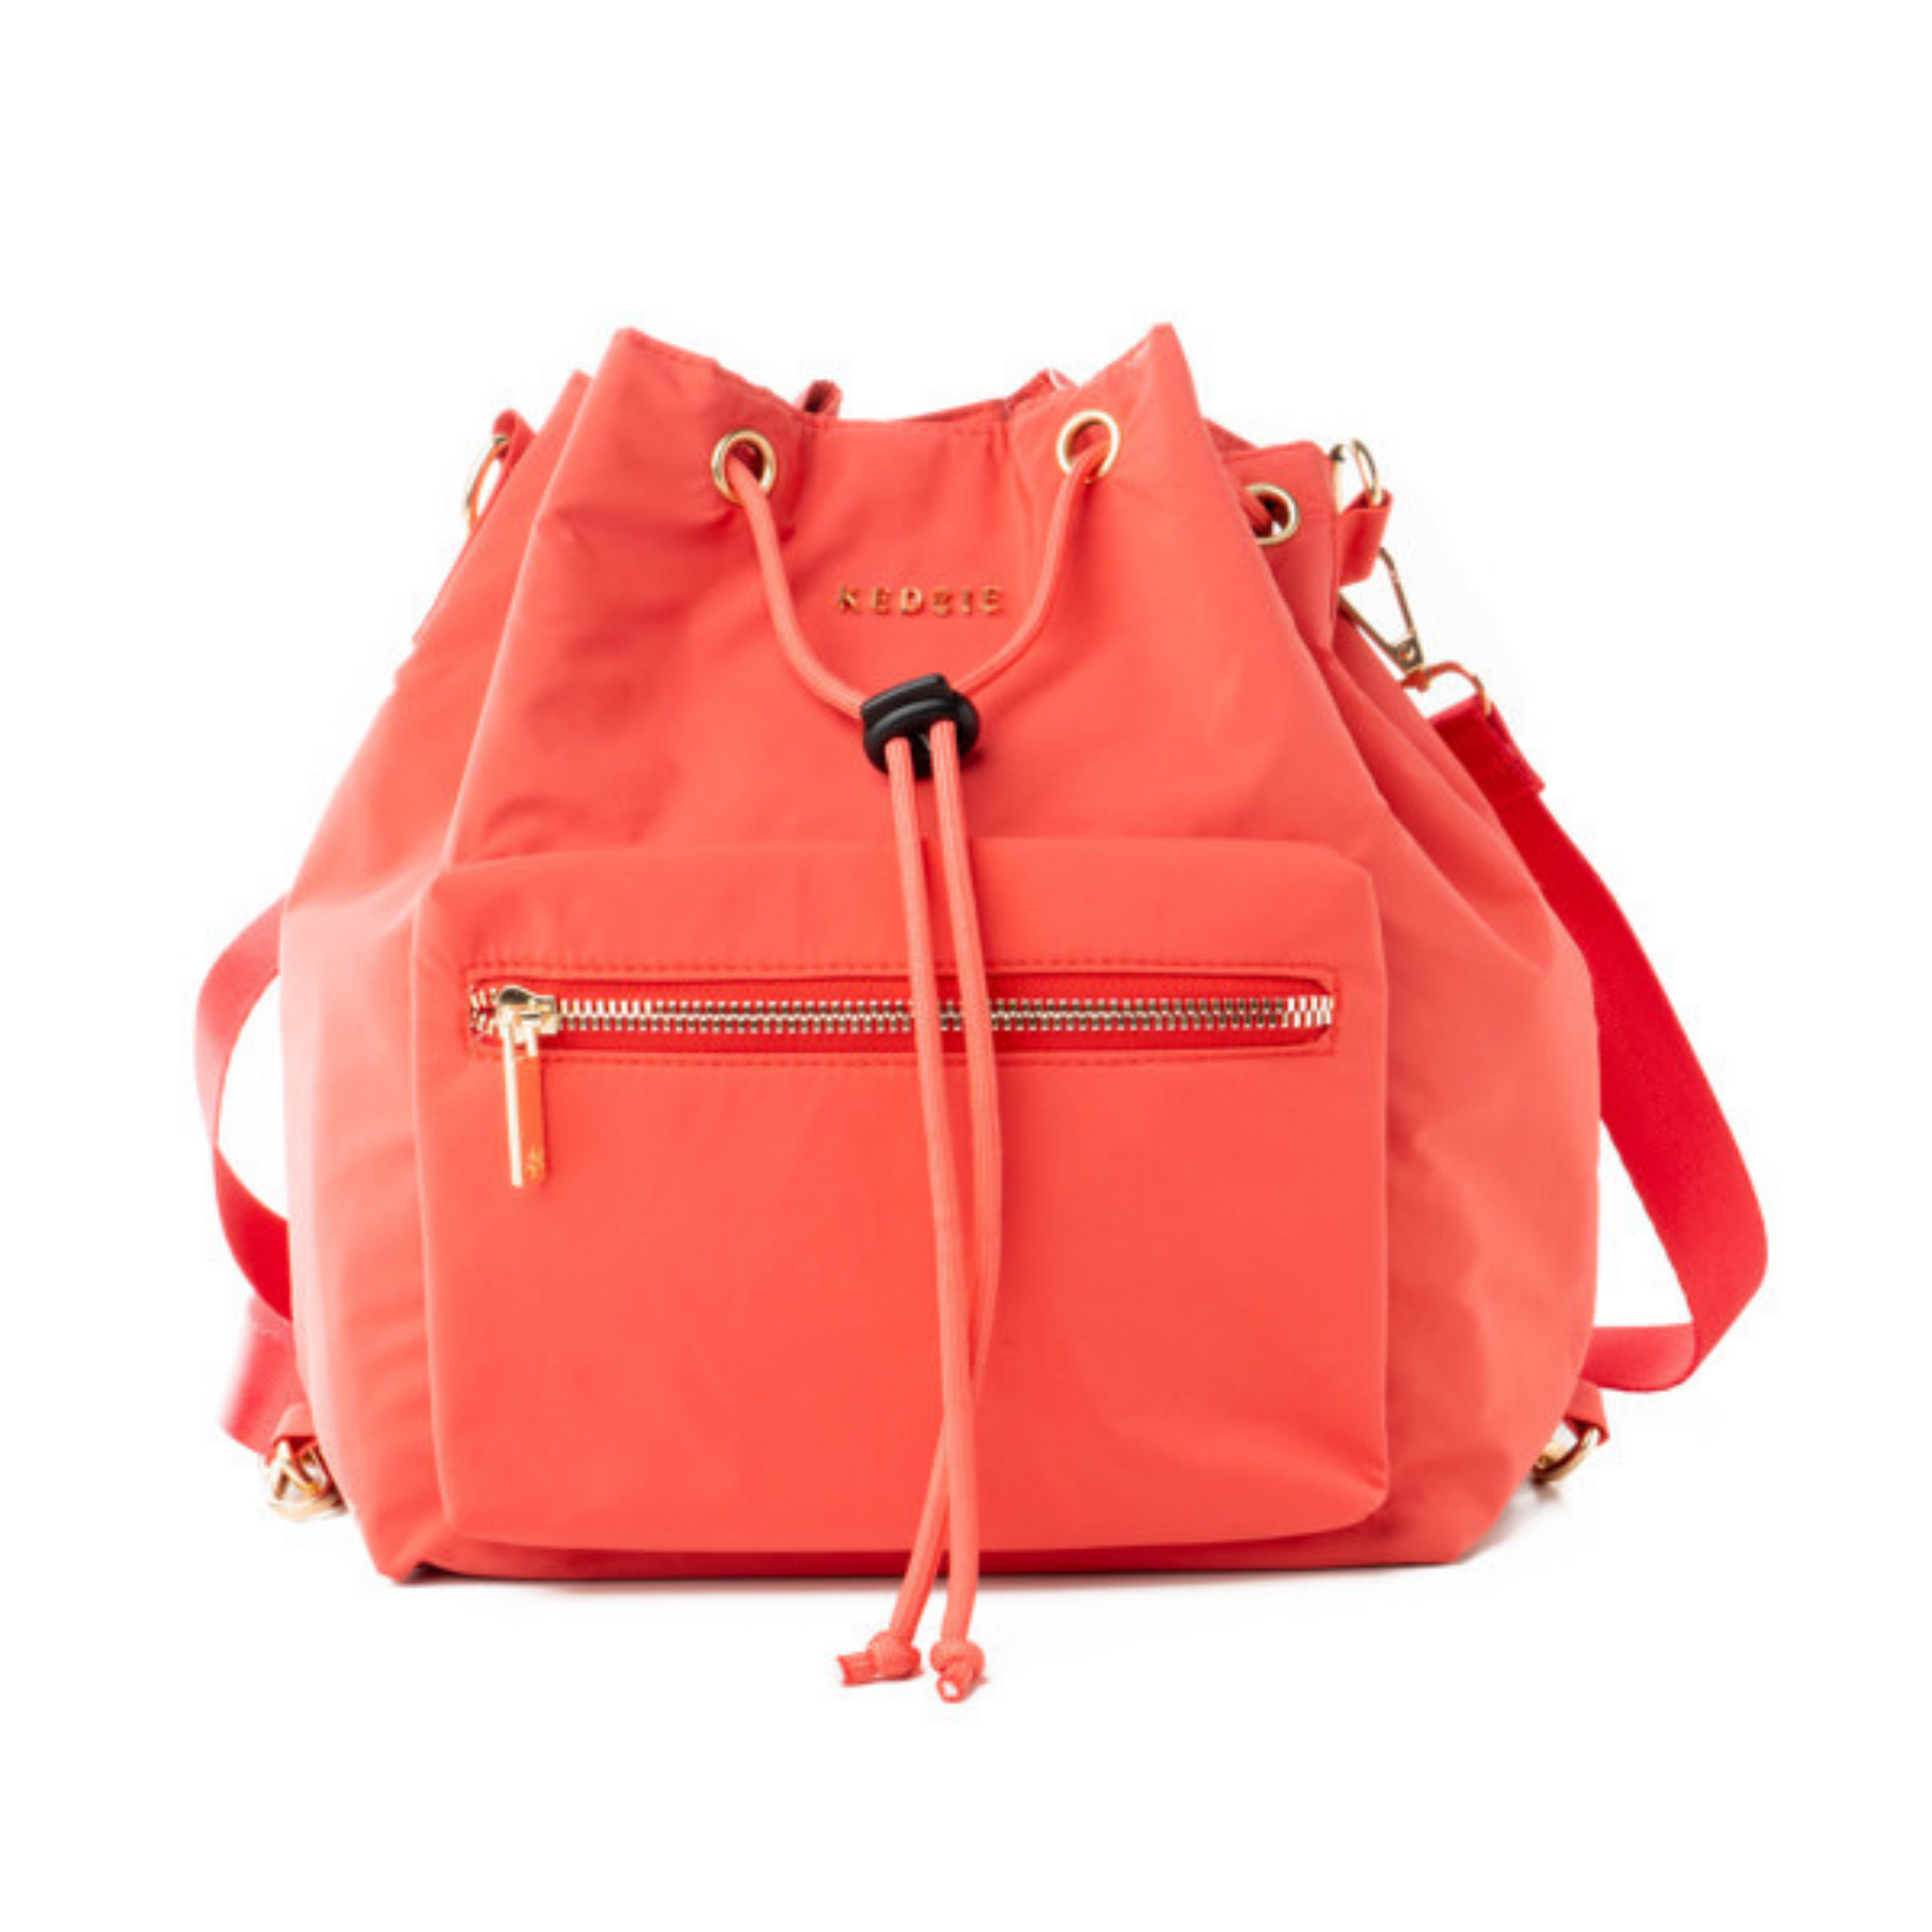 Aries convertible bucket bag in coral